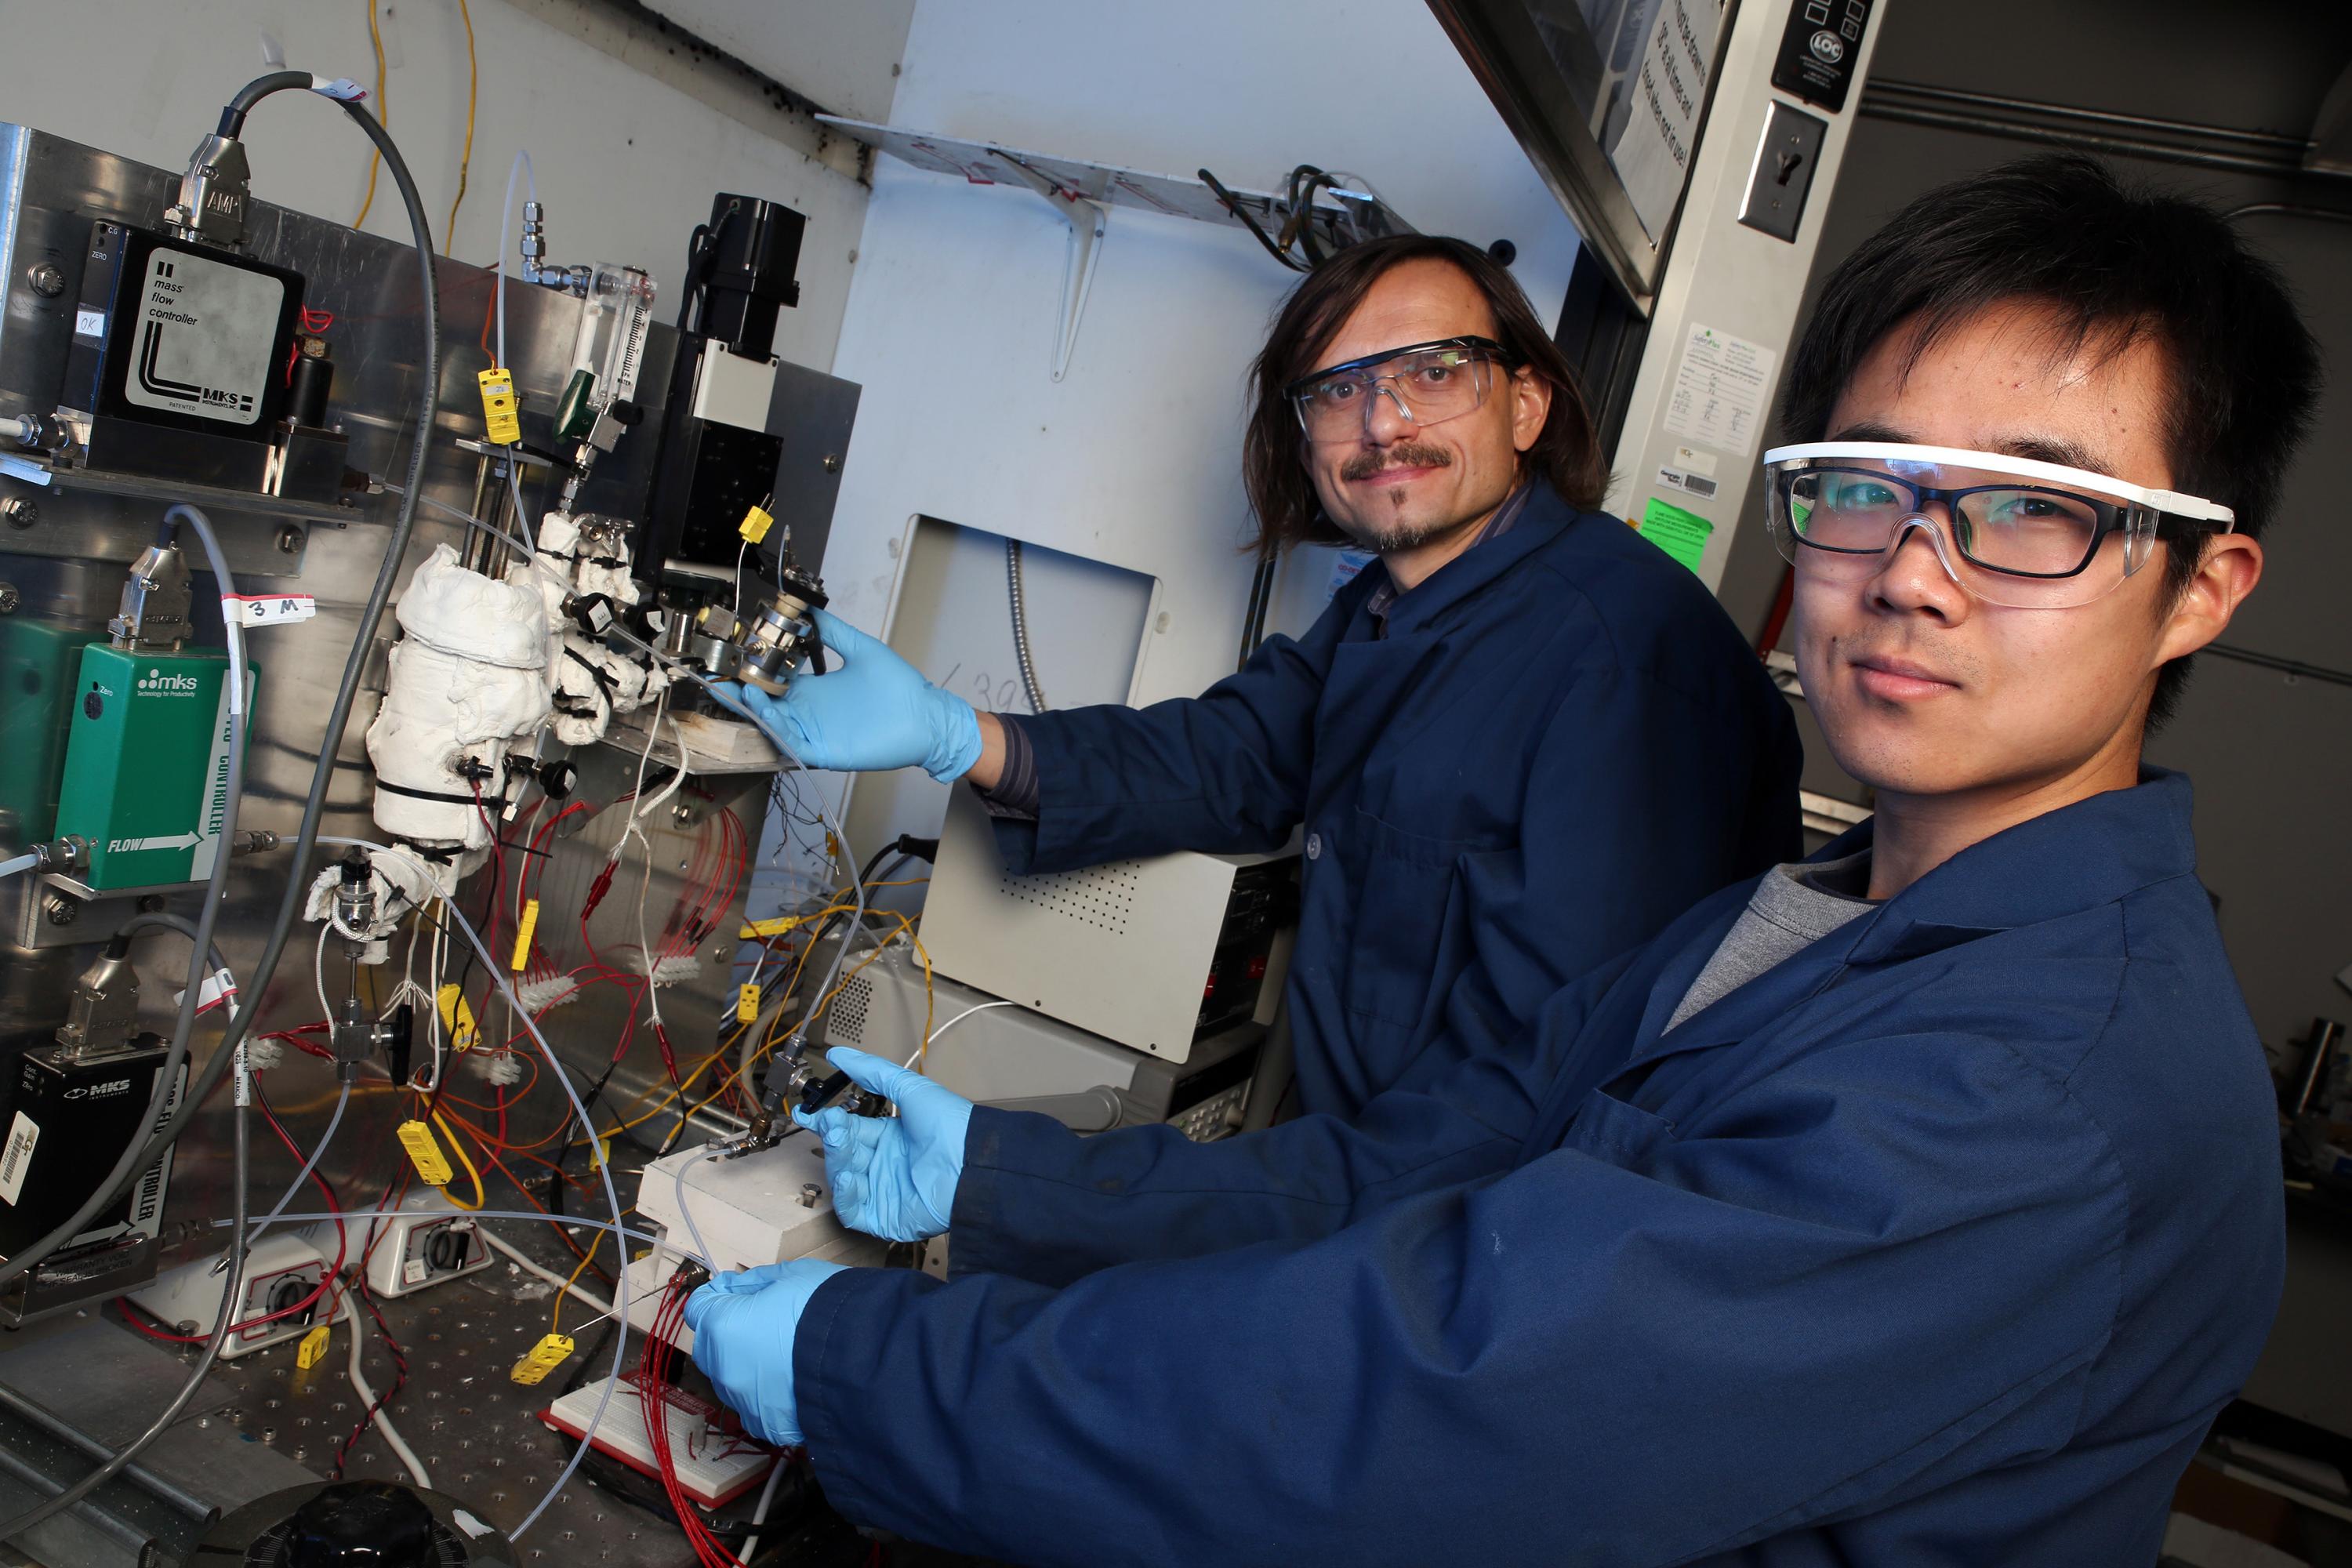 Georgia Tech professor Andrei Fedorov (left) and undergraduate research assistant Yuzhe Peng are shown with the laboratory-scale hydrogen reforming system that produces the green fuel at relatively low temperature in a process that can be scaled up or down to meet specific needs. (Credit: Candler Hobbs, Georgia Tech)